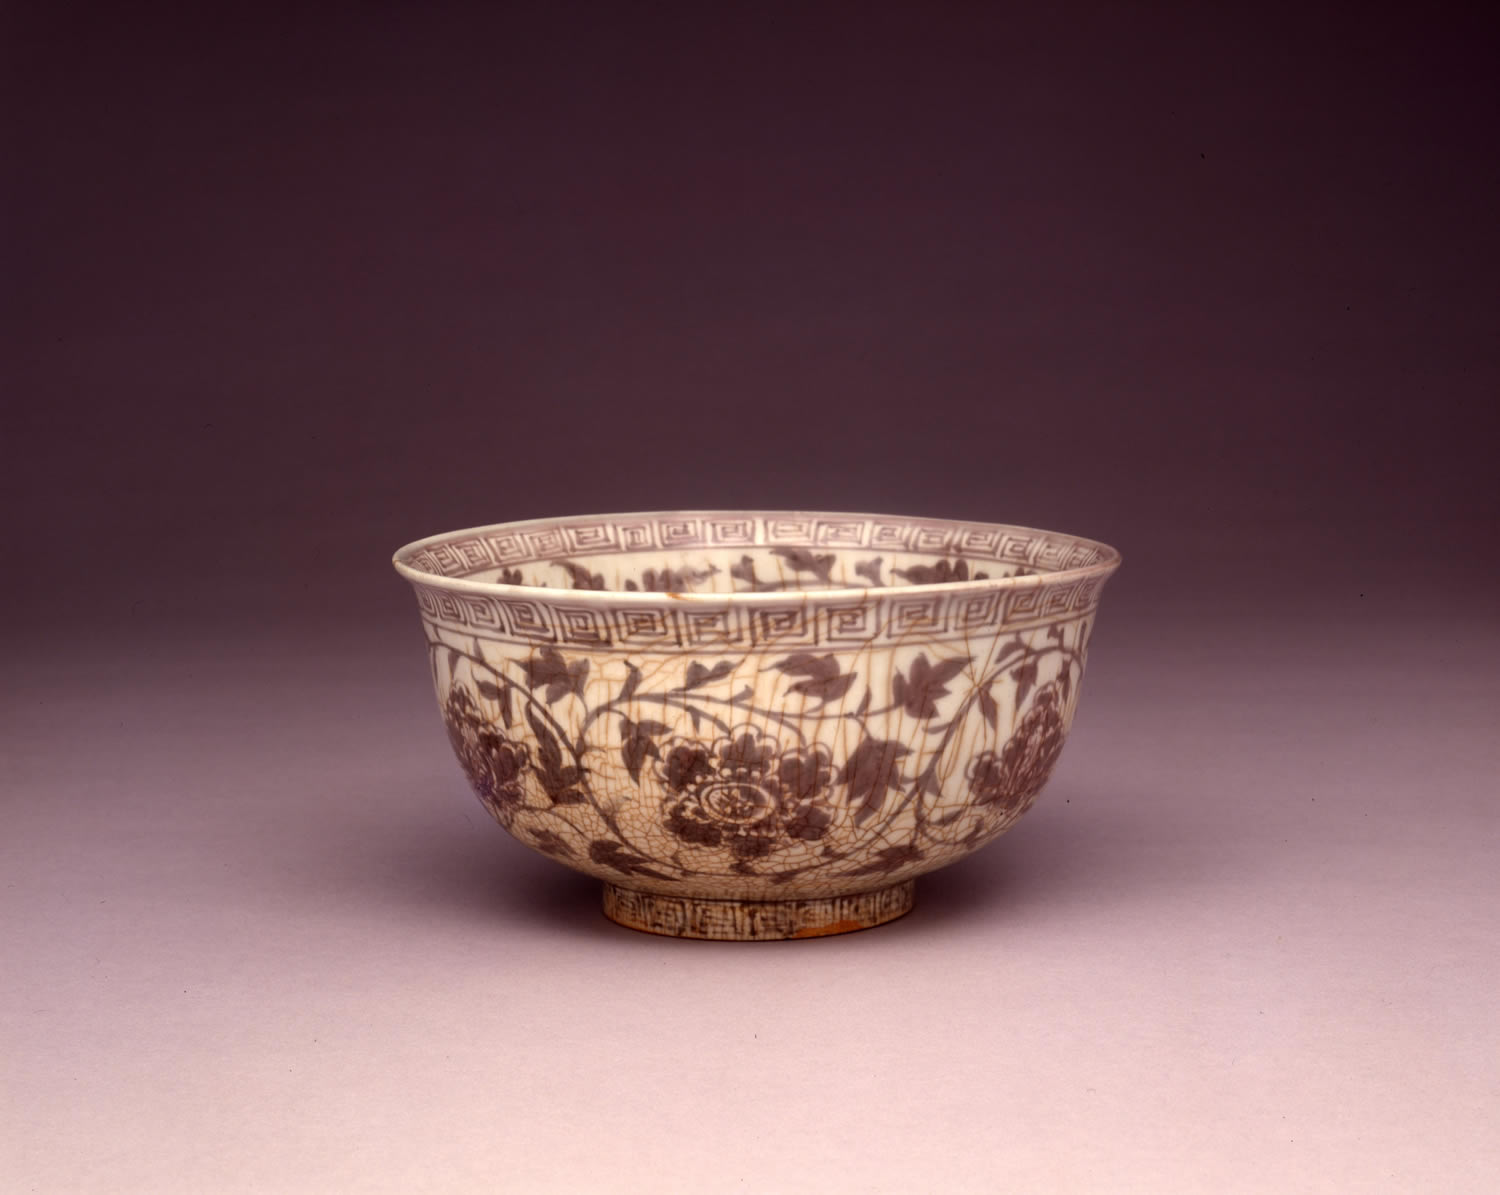 Bowl with flower scroll design in underglaze red